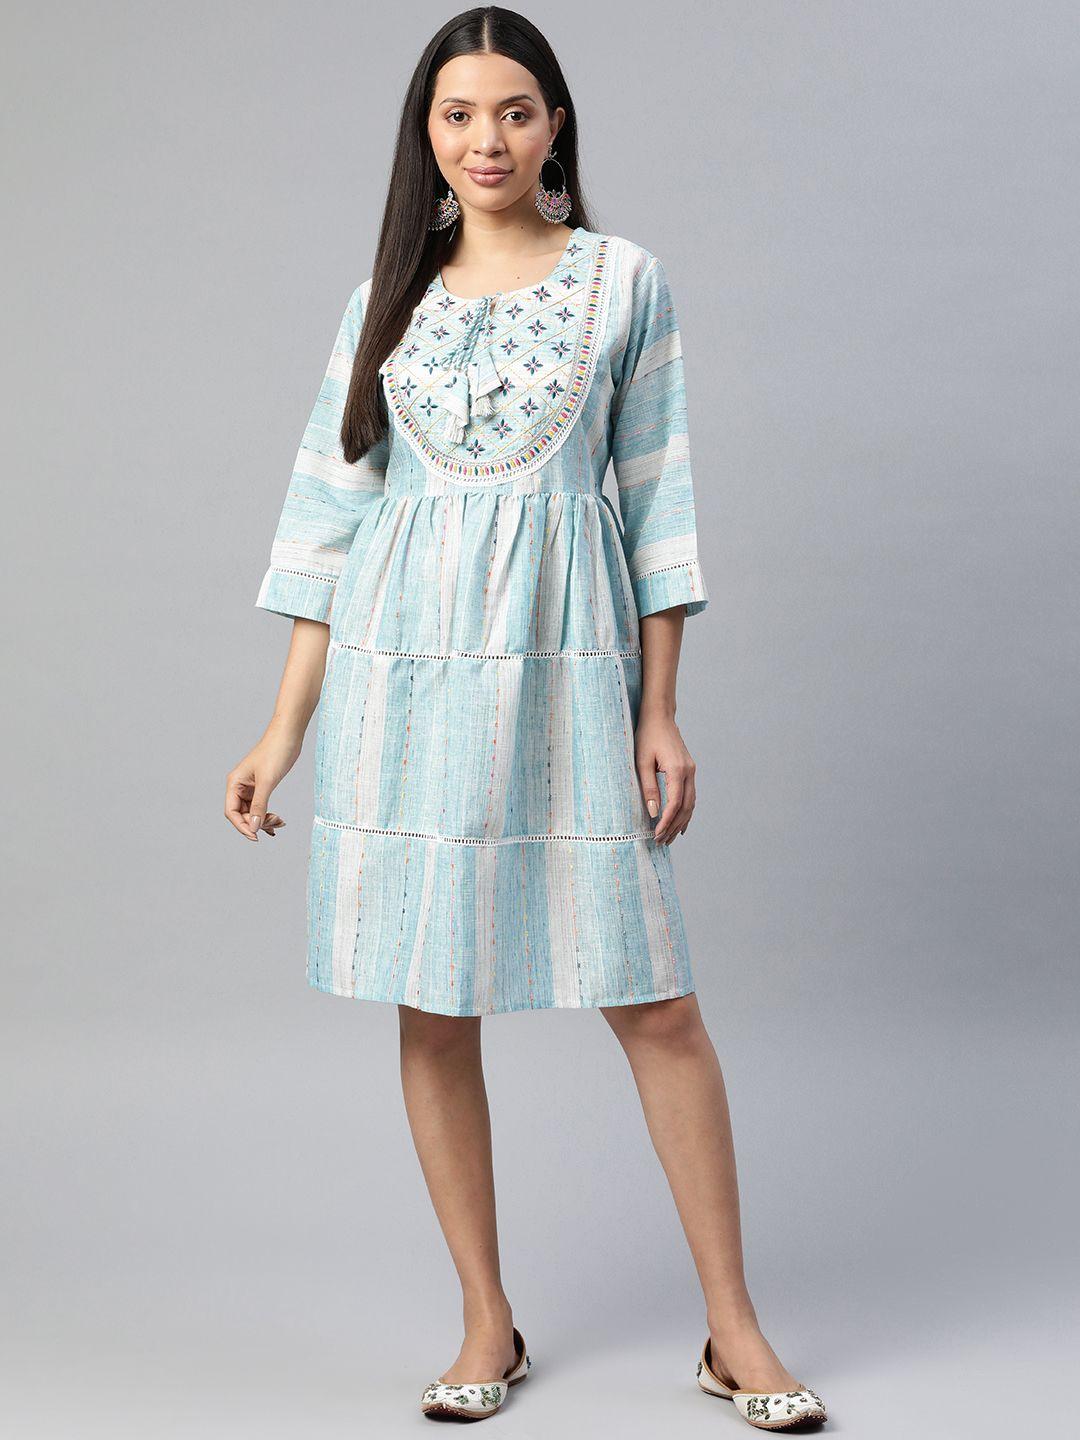 readiprint fashions floral embroidered tie-up neck cotton a-line dress